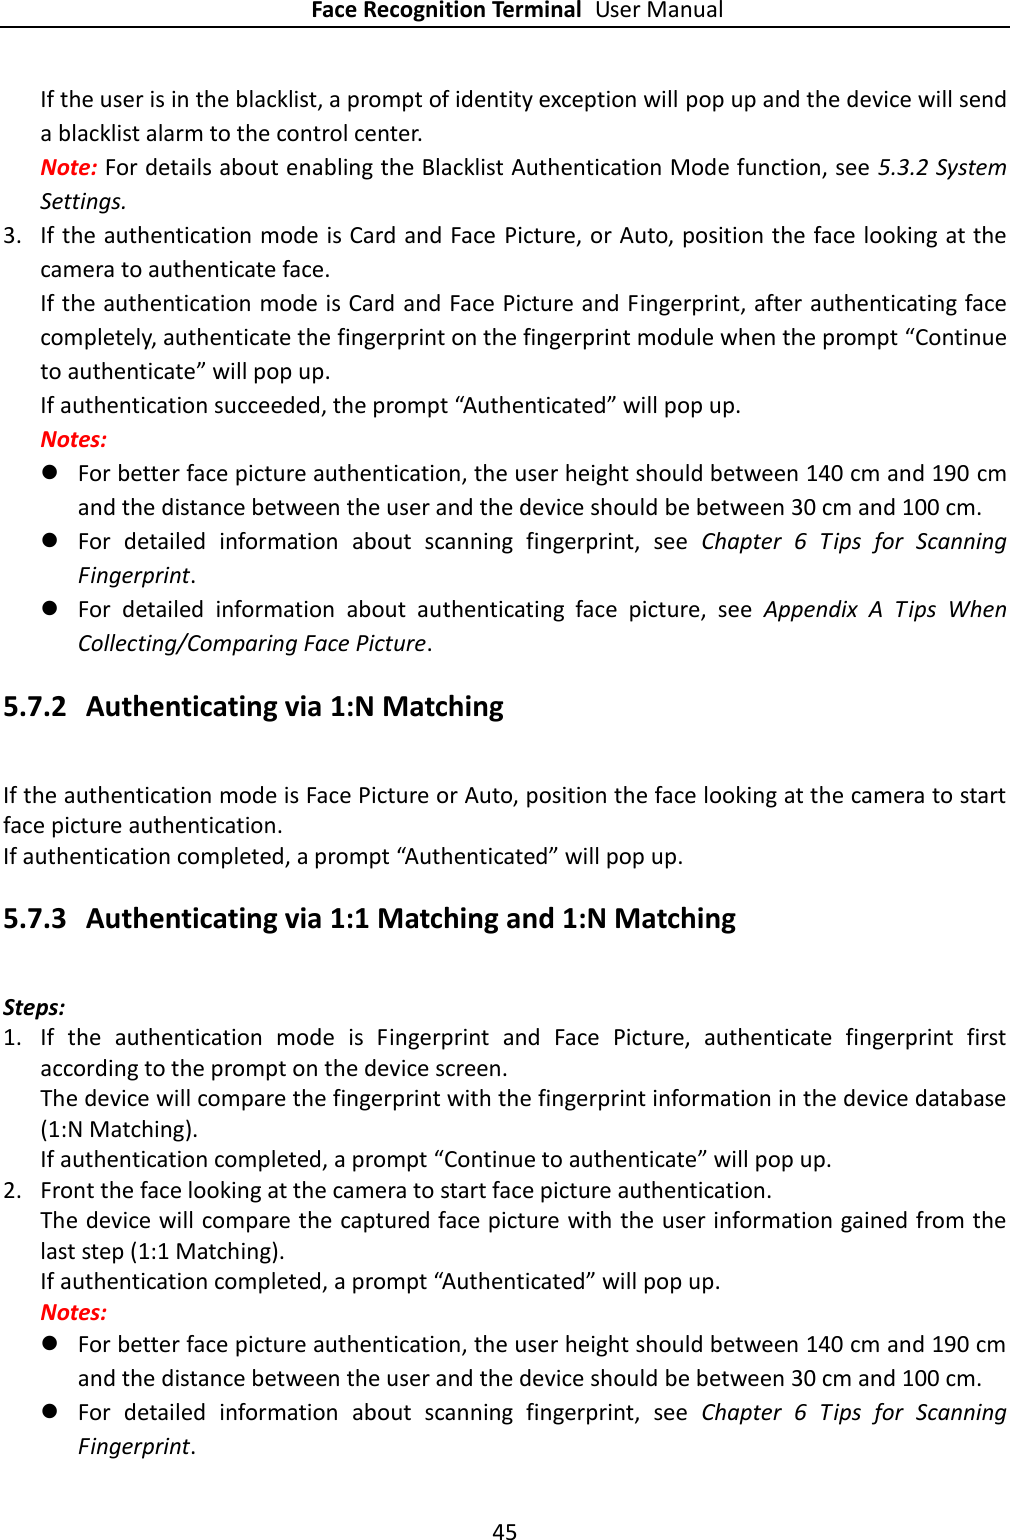 Page 45 of Hangzhou Hikvision Digital Technology K1T604 Face Recognition Terminal User Manual 